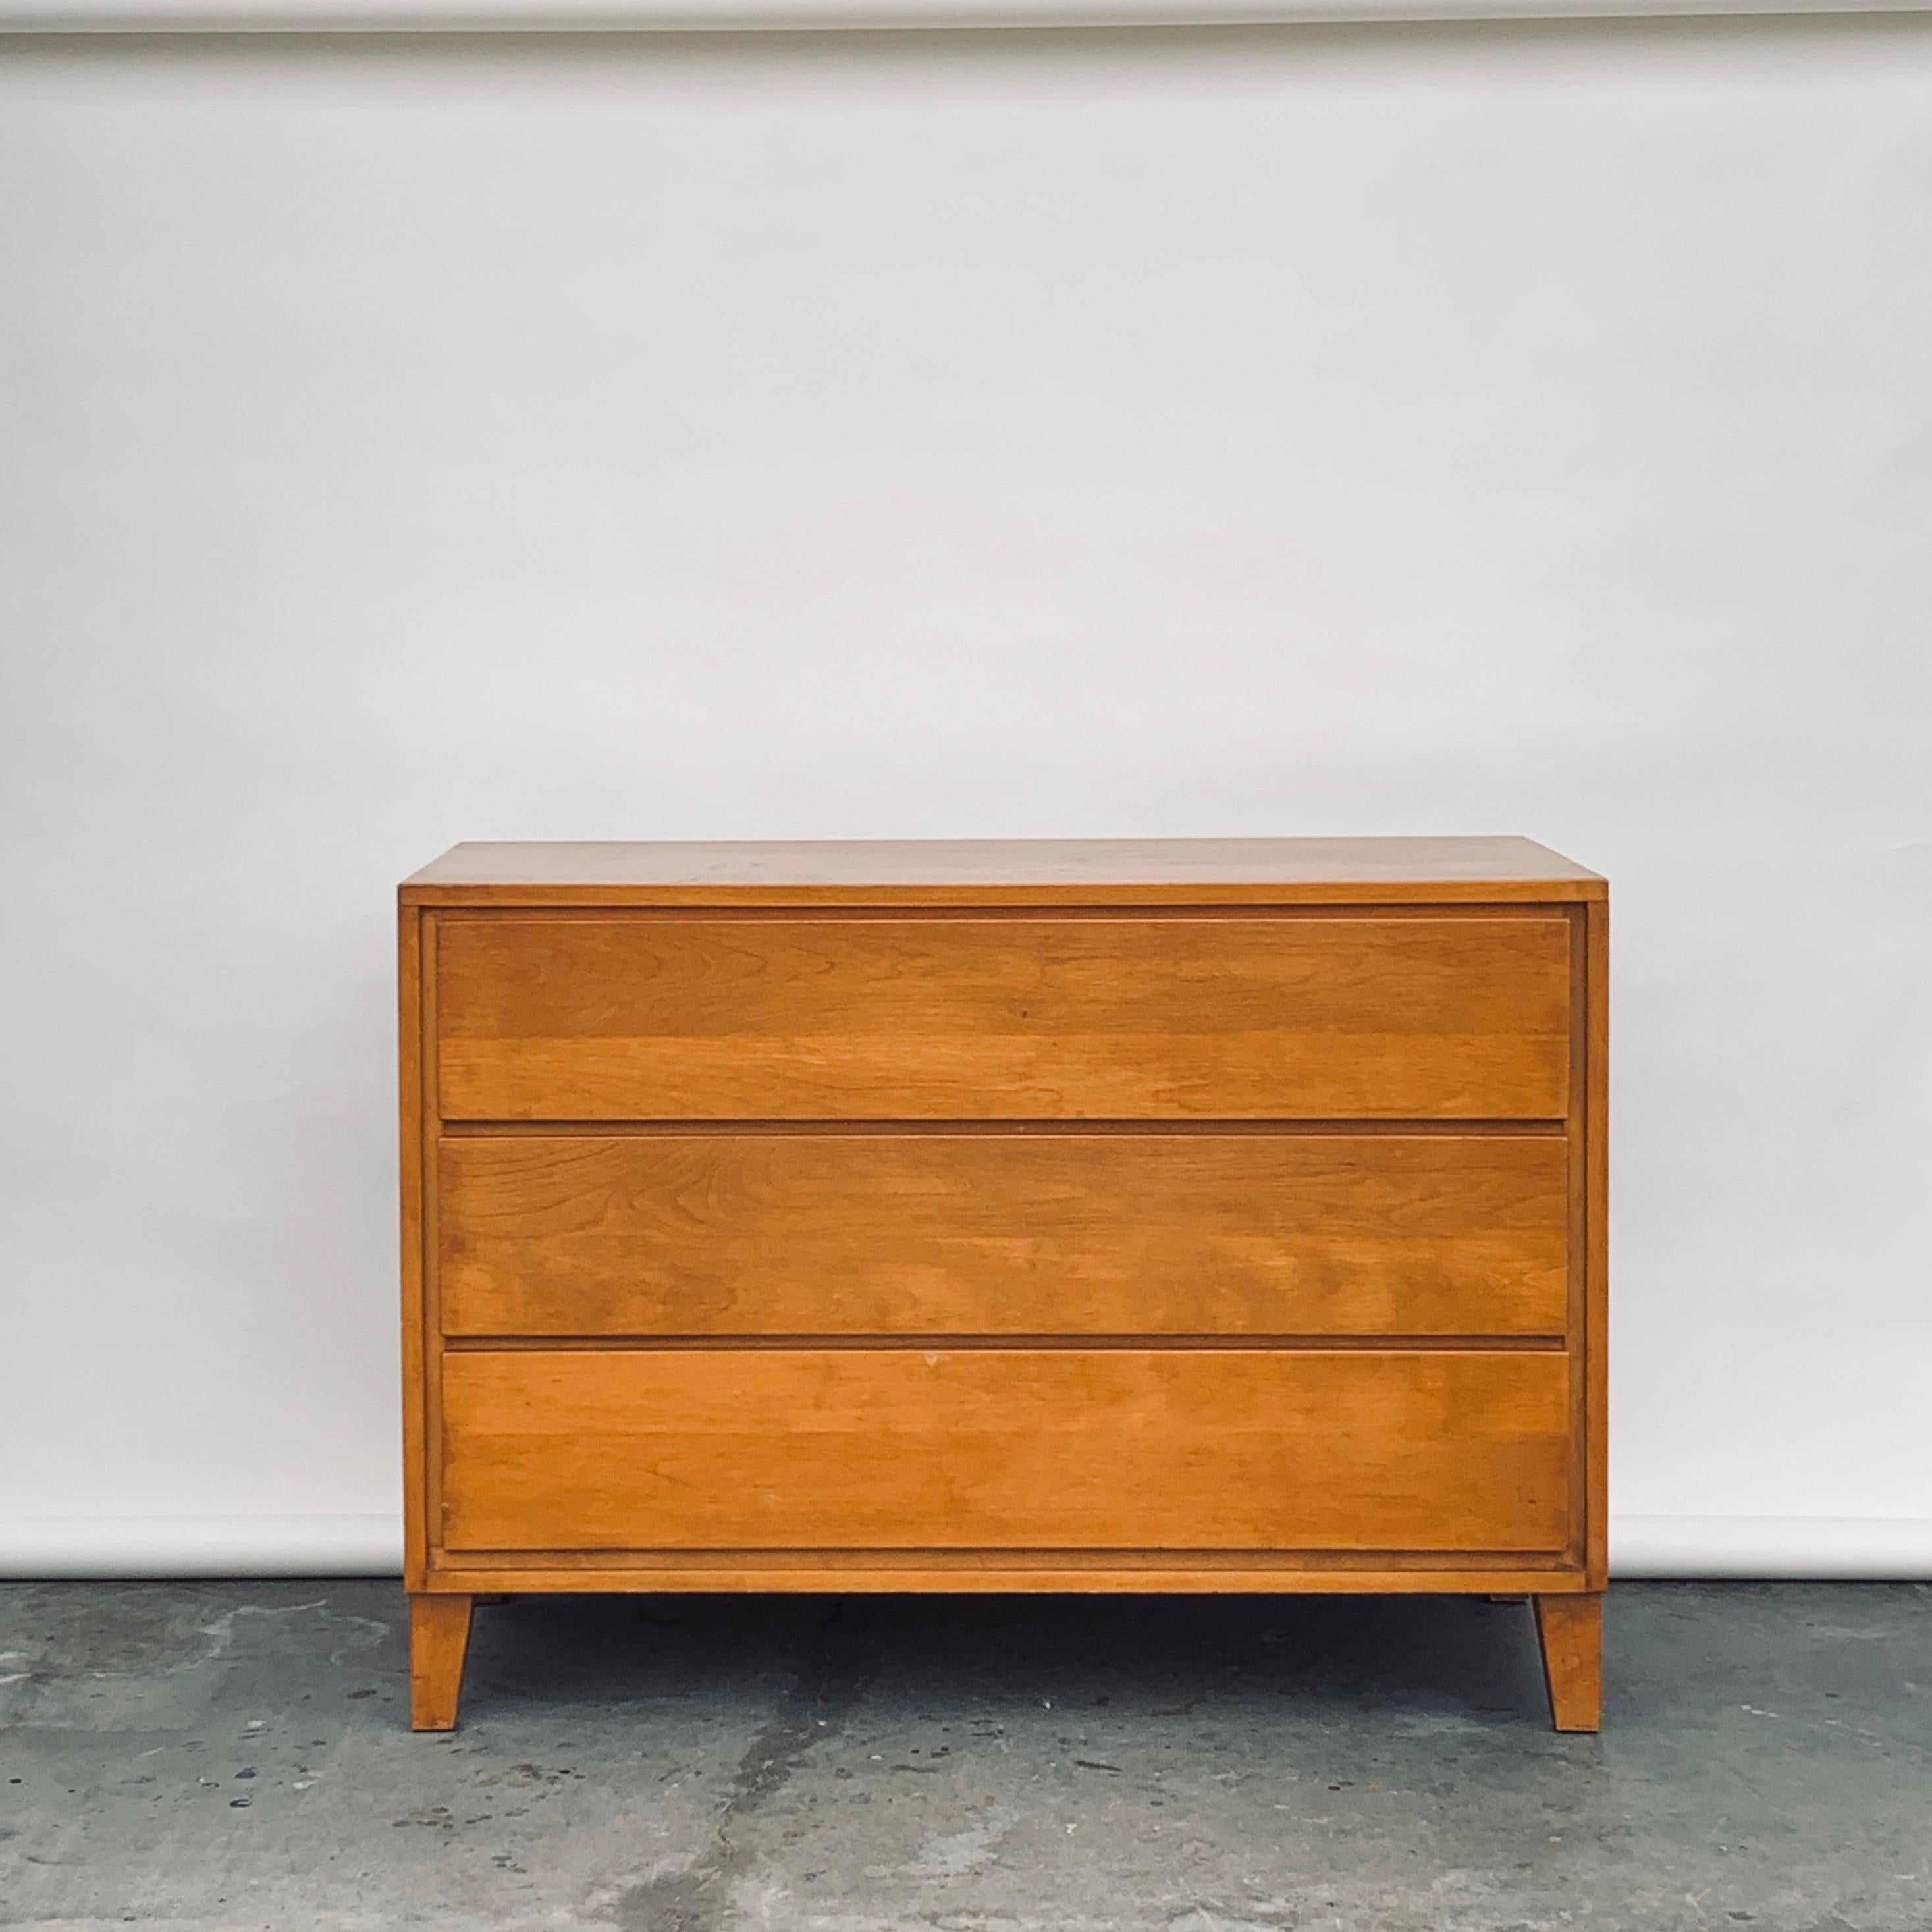 Elegant vintage chest of drawers / dresser by Leslie Diamond for Conant Ball.

This simple, understated chest of drawers / dresser was designed by Leslie Diamond for the ModernMates collection manufactured by Conant Ball of Massachusetts, circa